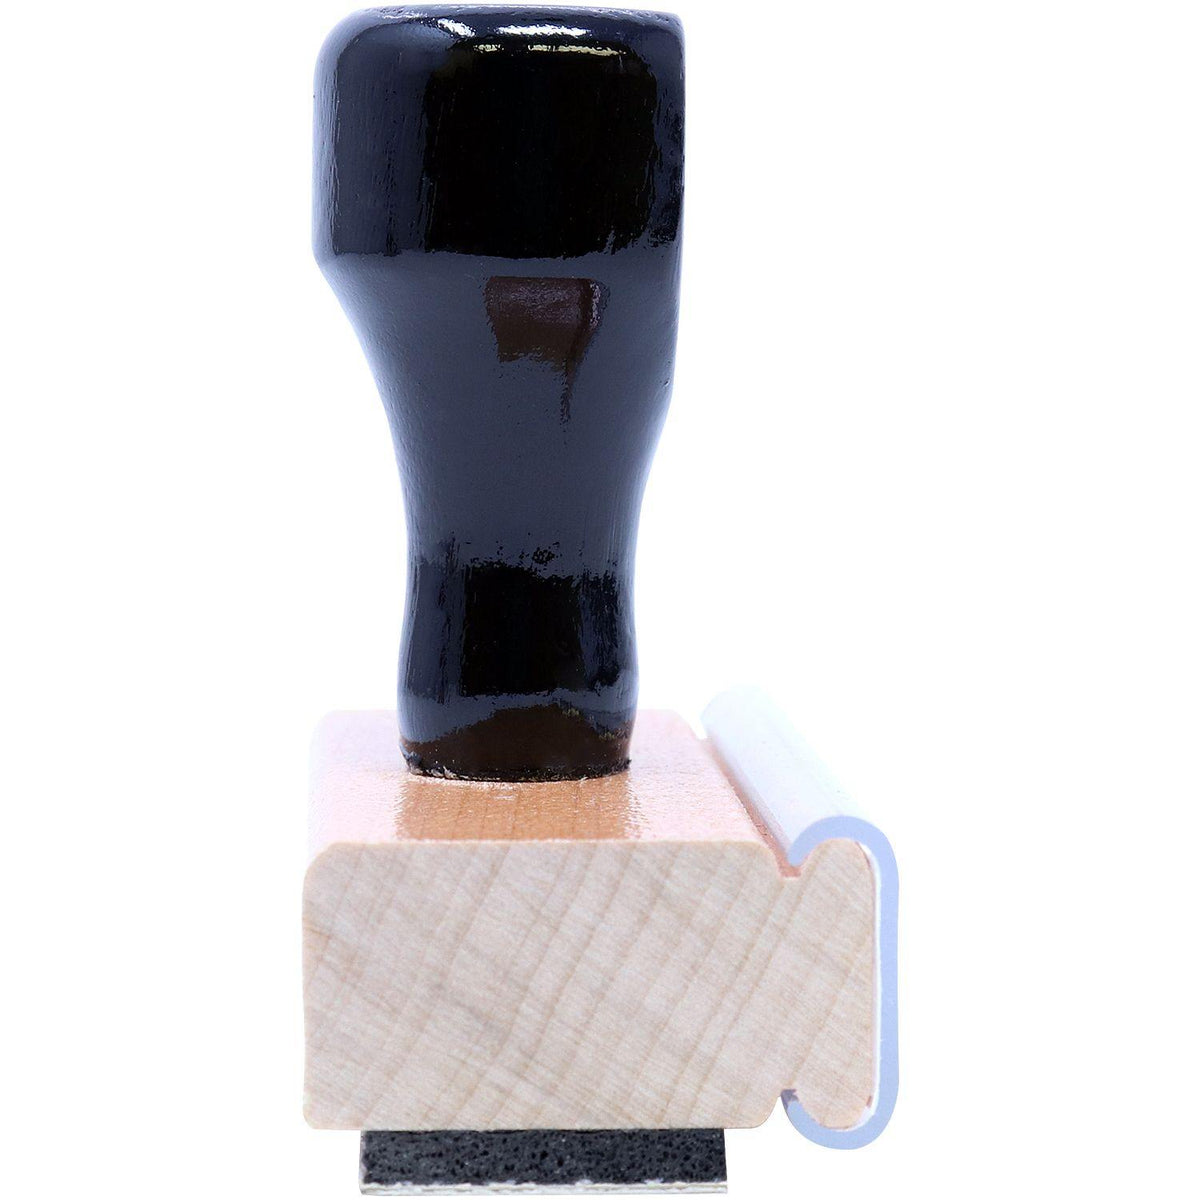 Large Stop Payment Rubber Stamp - Engineer Seal Stamps - Brand_Acorn, Impression Size_Large, Stamp Type_Regular Stamp, Type of Use_Finance